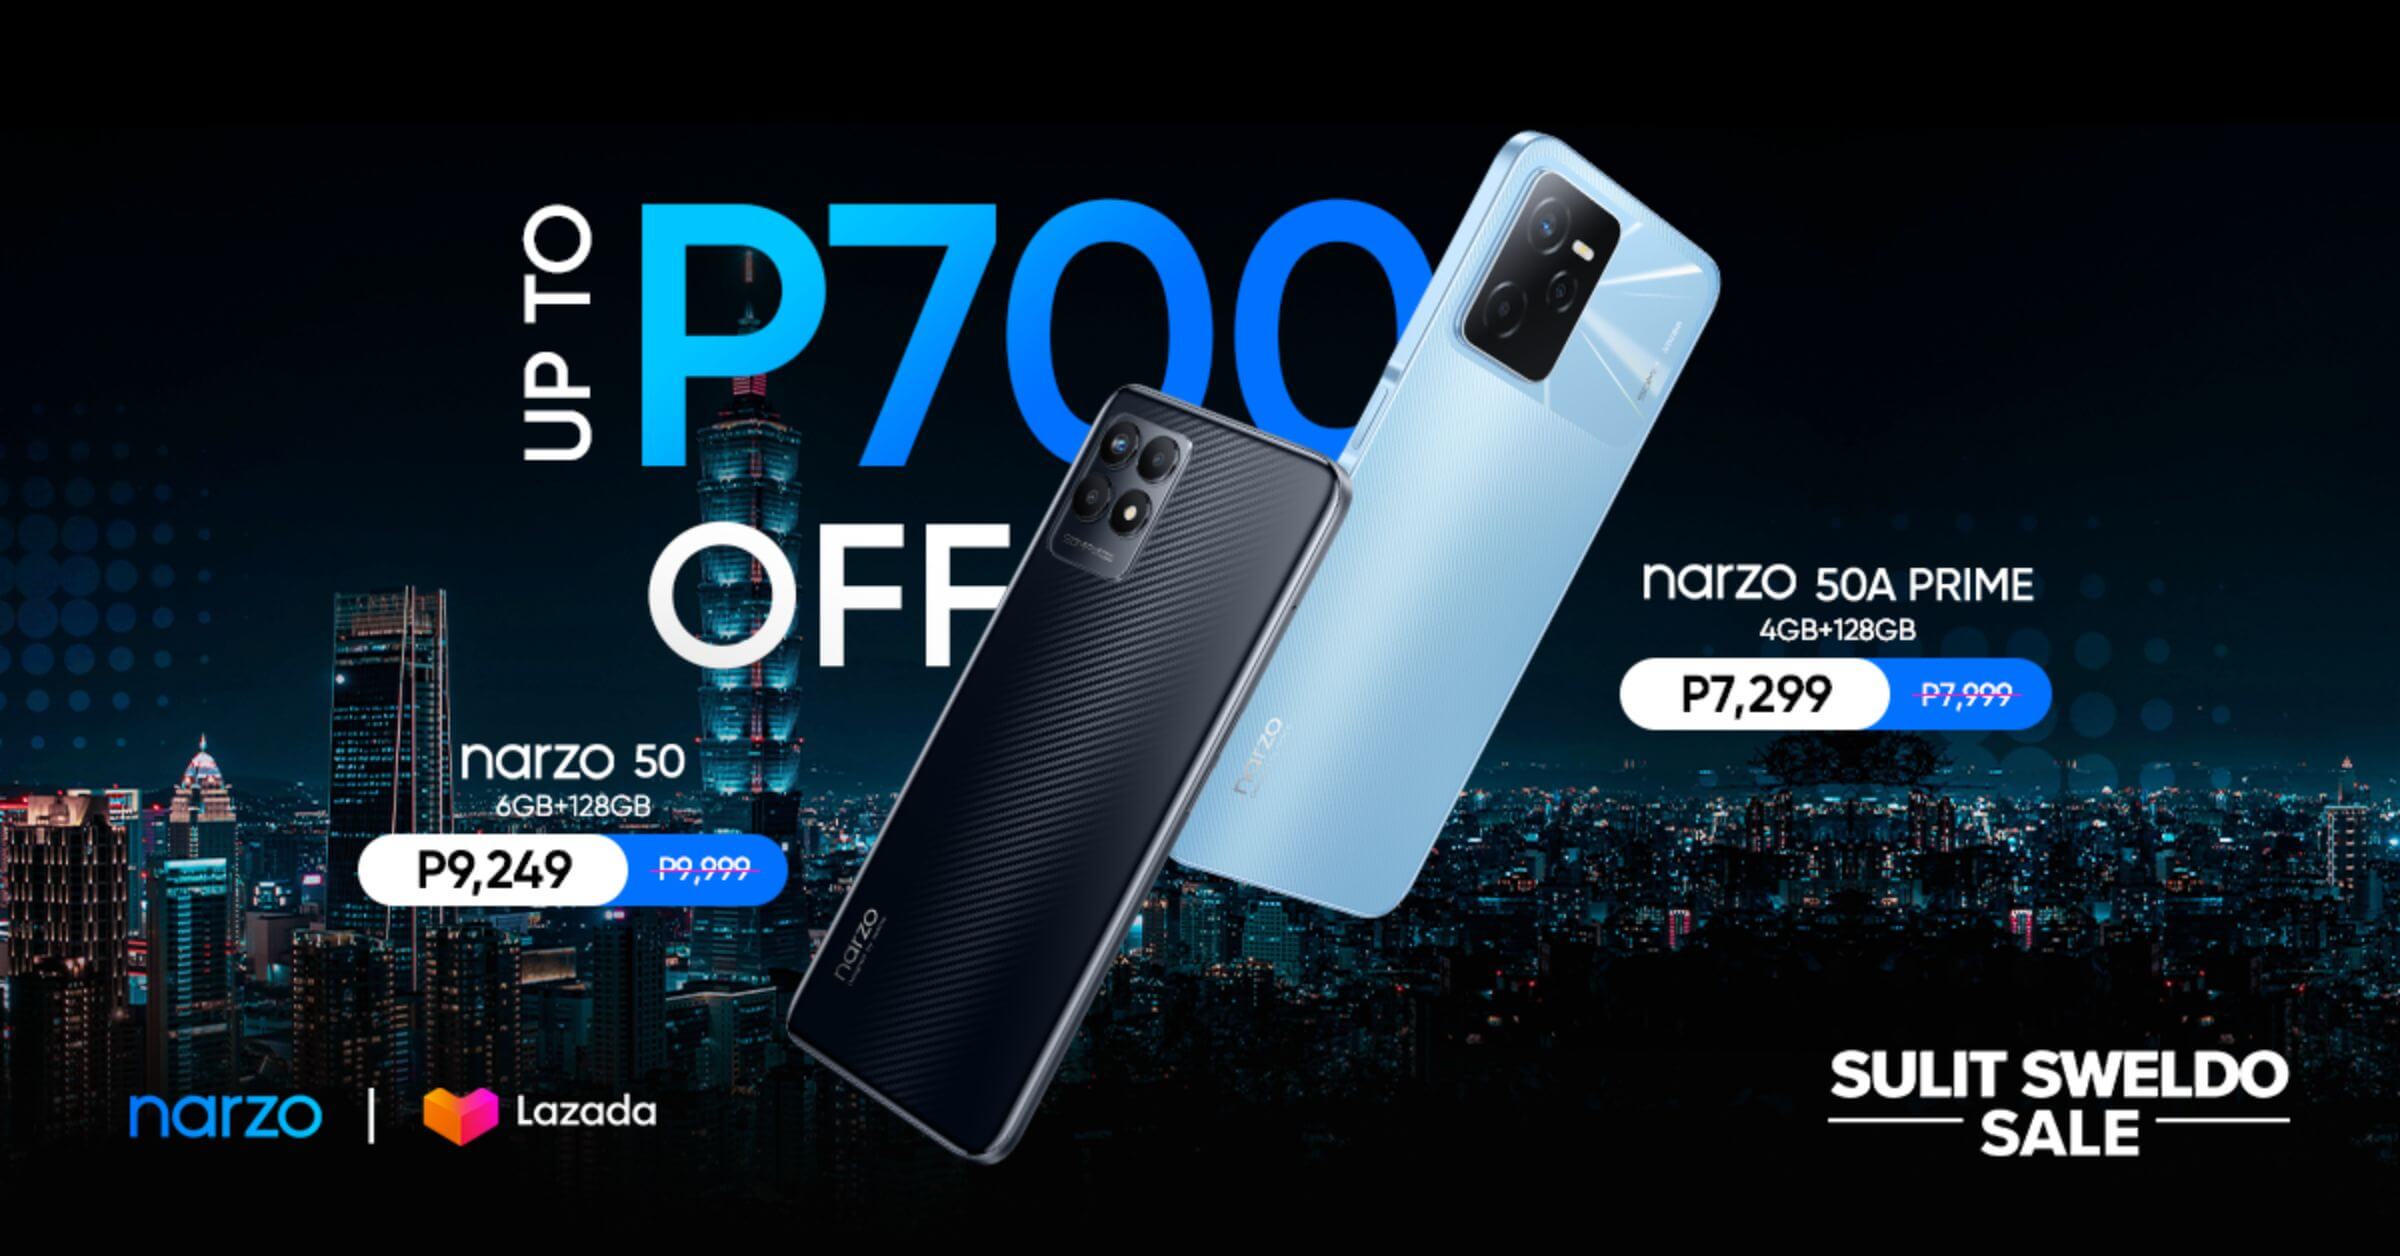 Sulit Sweldo with narzo! Huge discounts up to P700 only this June 30 on Lazada